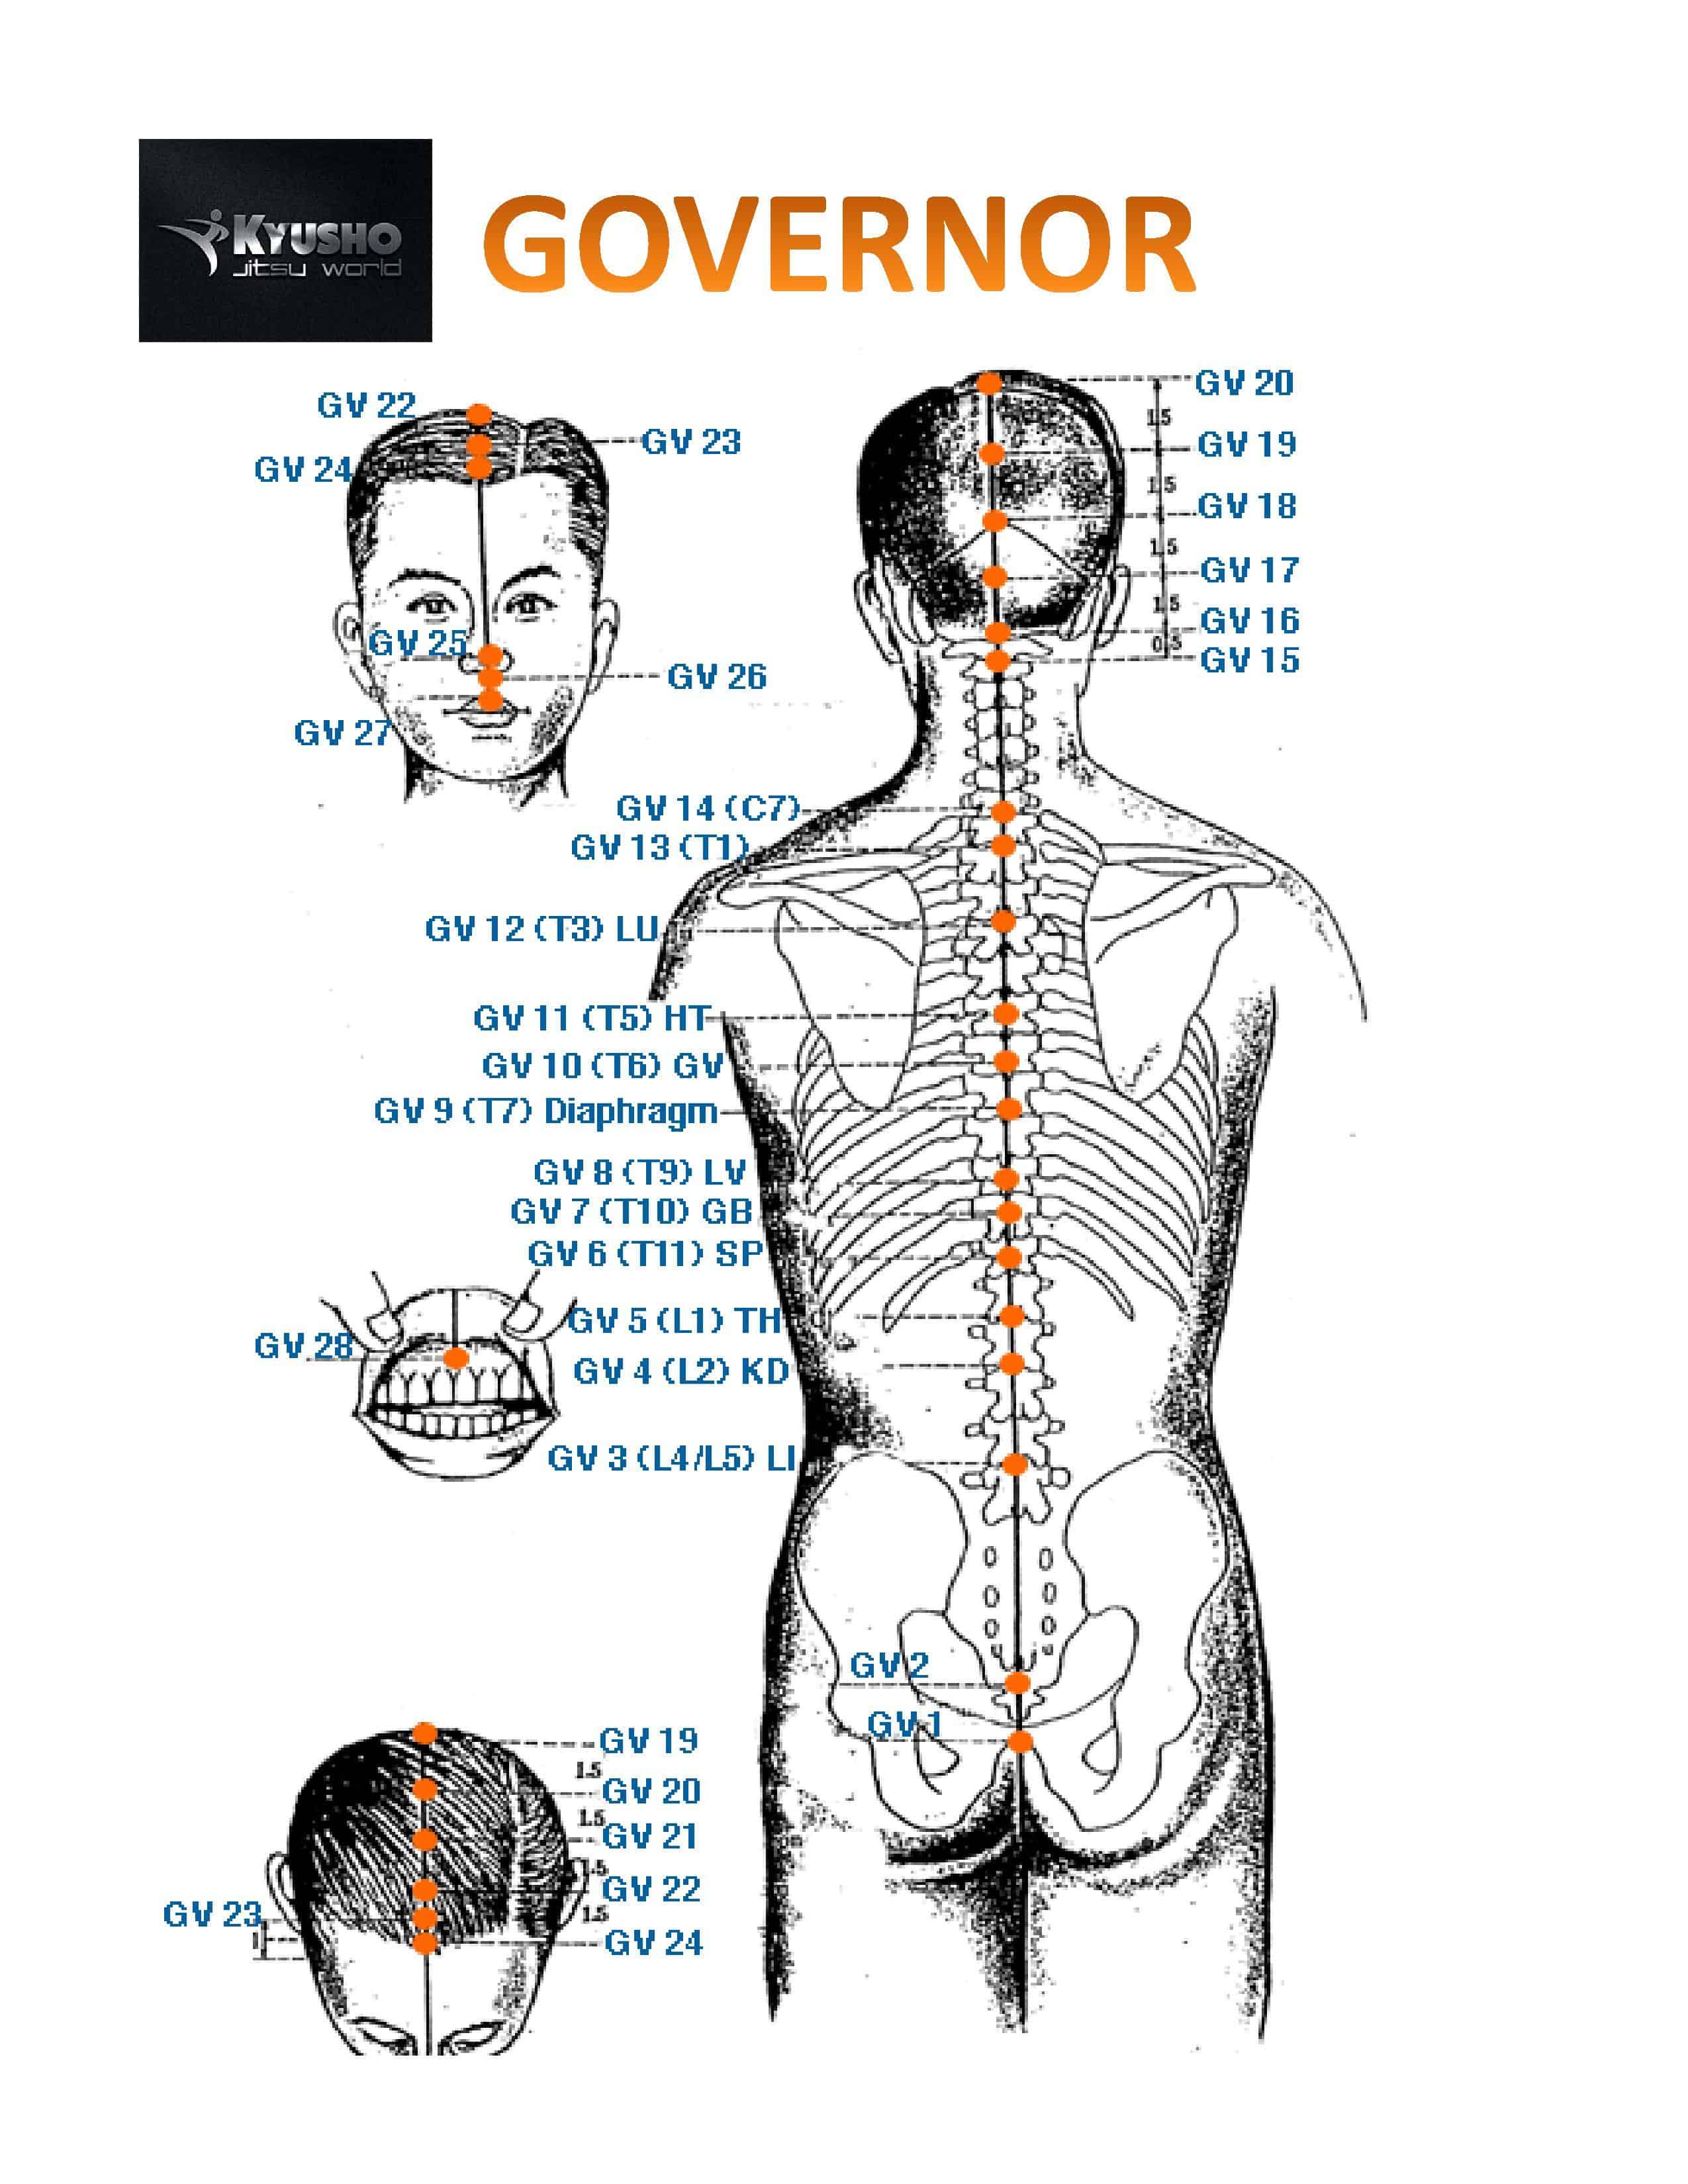 The Pressure Point Governor Vessel